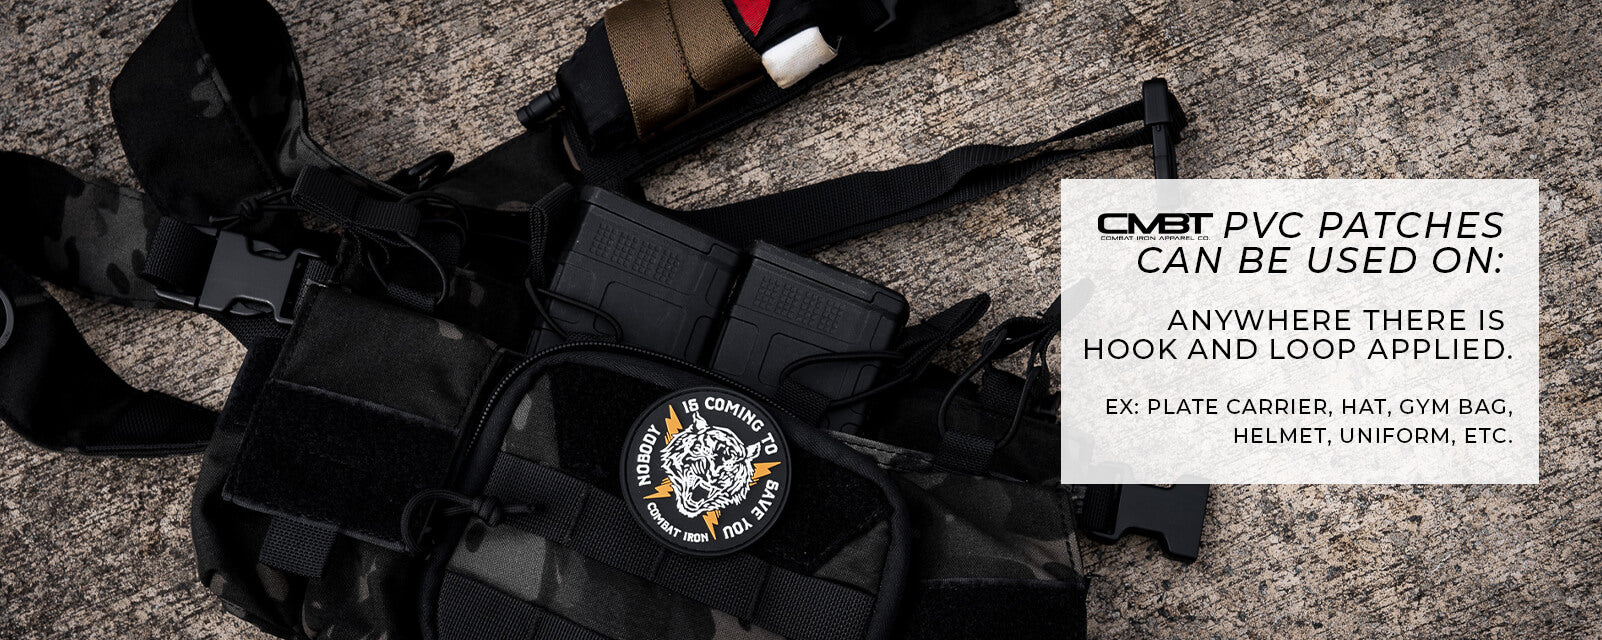 Tactical Morale Patches: PVC, Velcro Morale Patches for Civil and